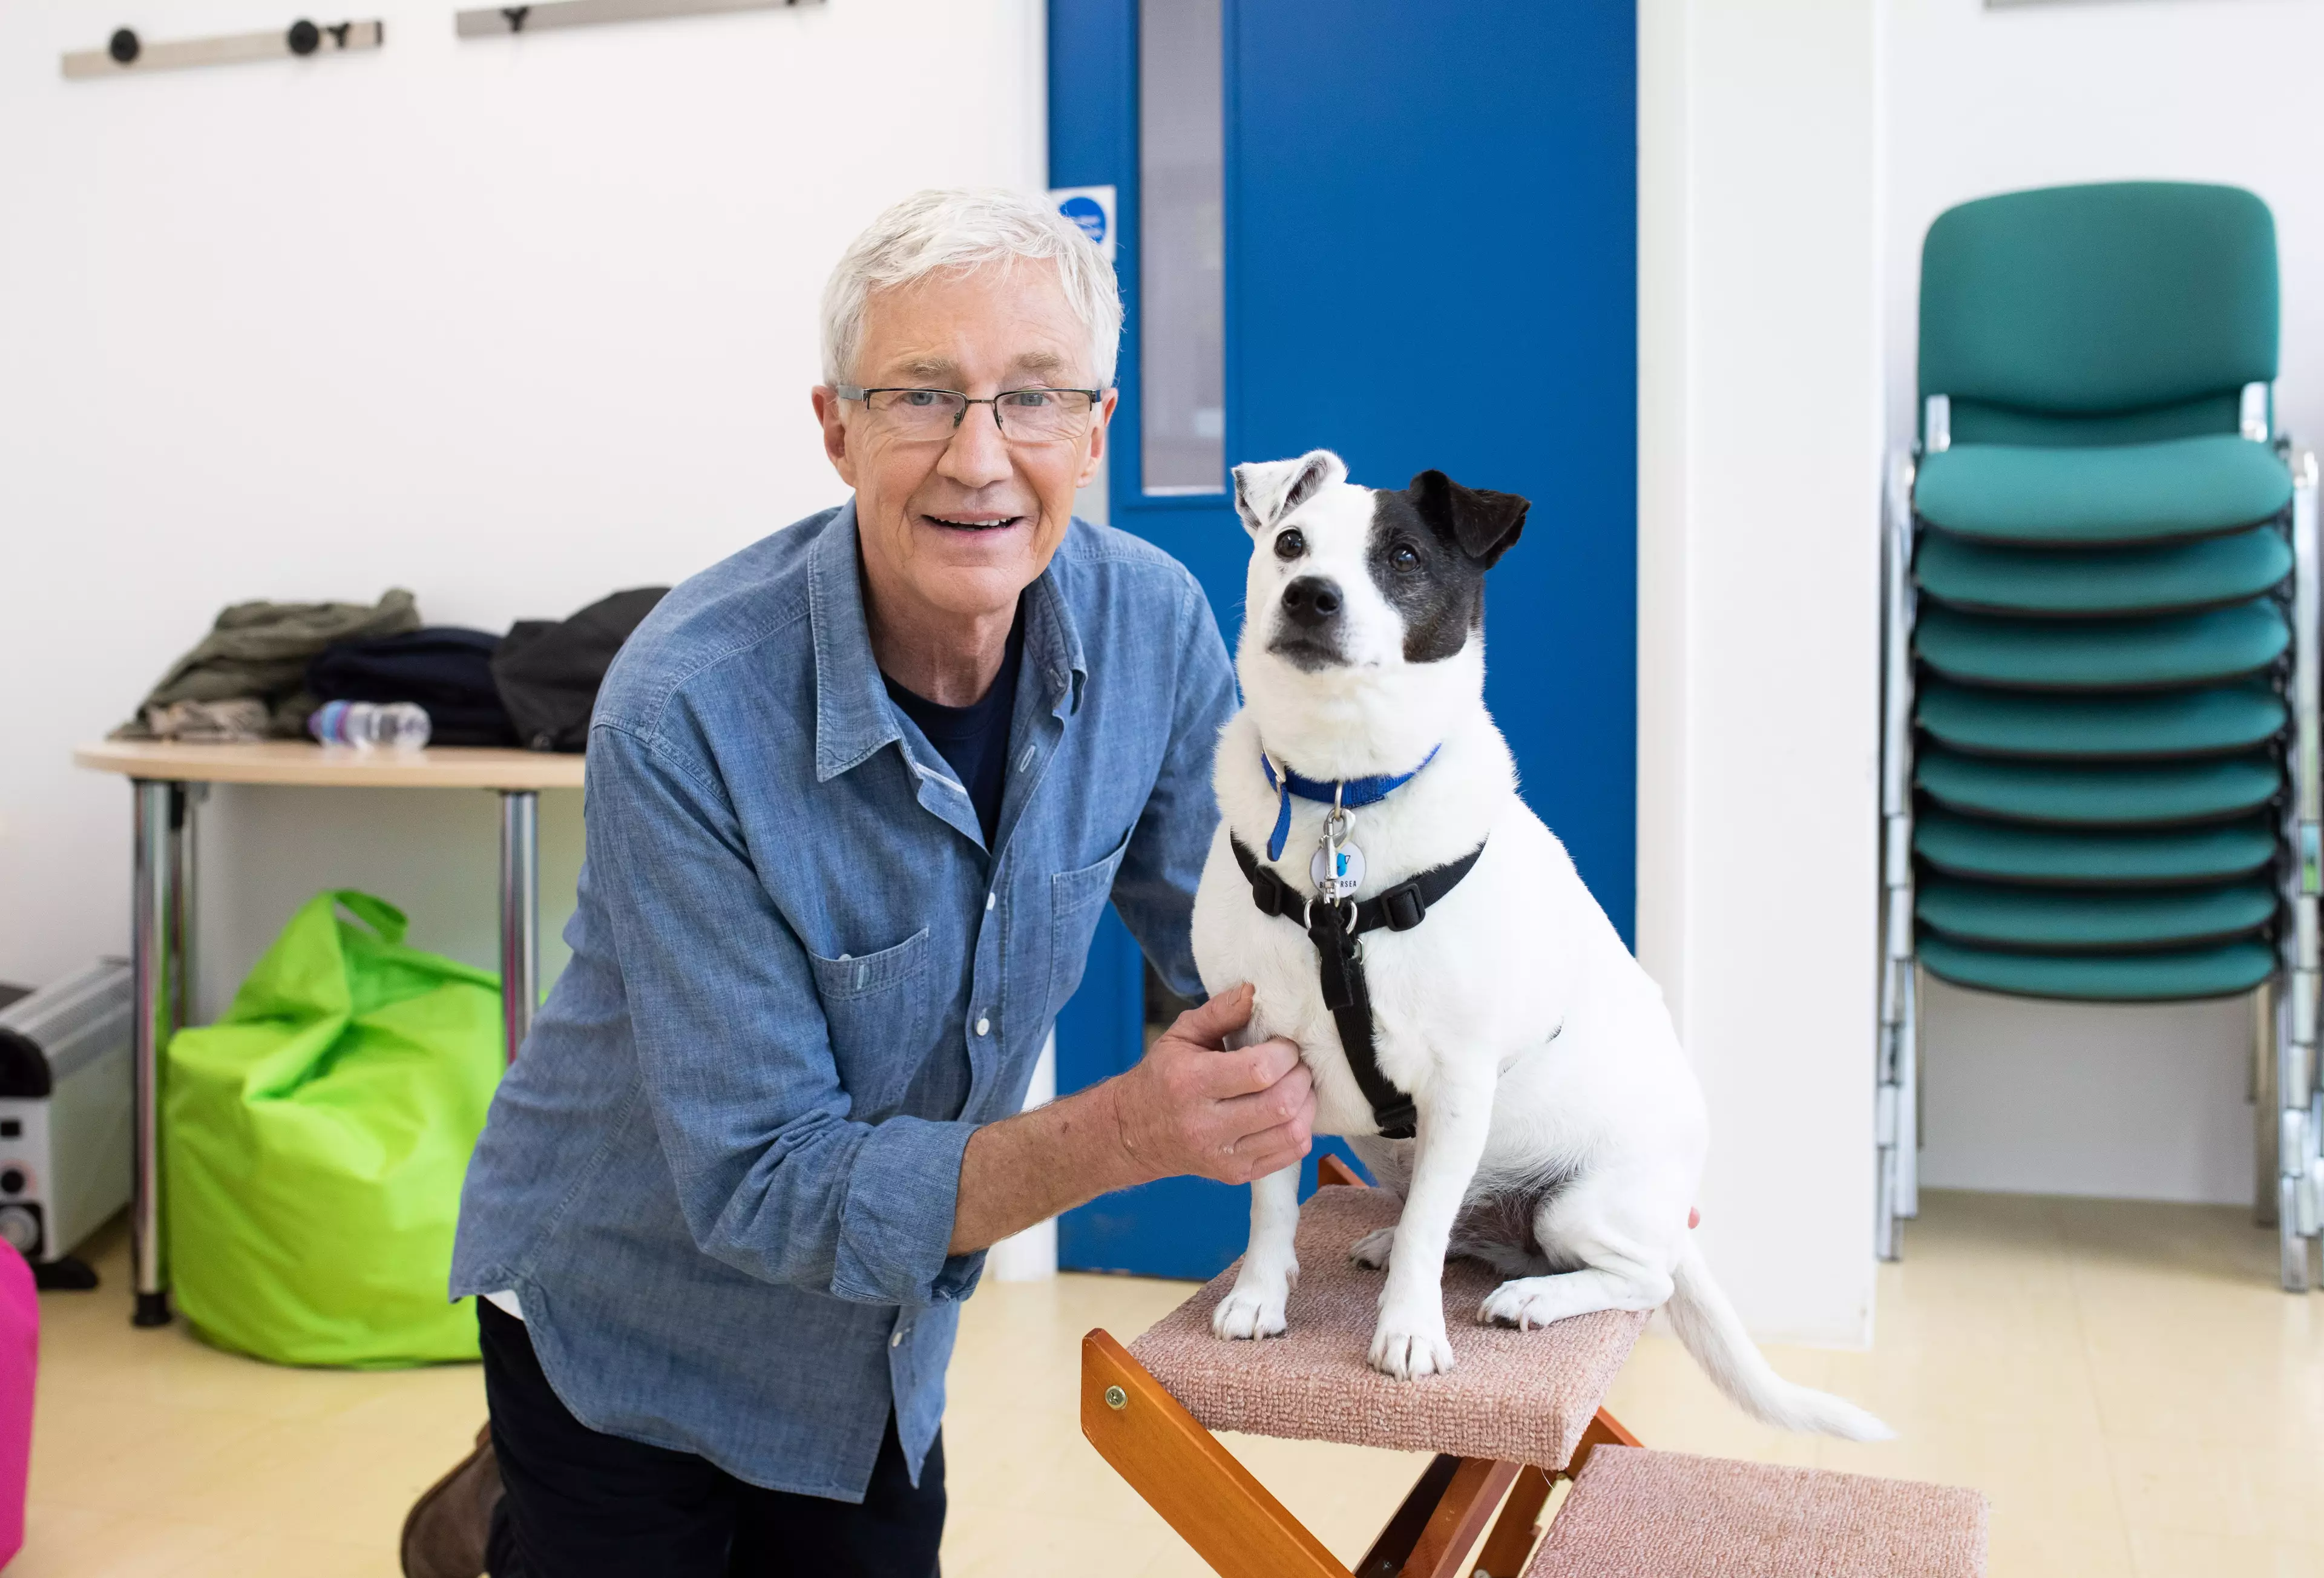 Archie has made a friend in Paul O'Grady who is trying to help him find a home. (